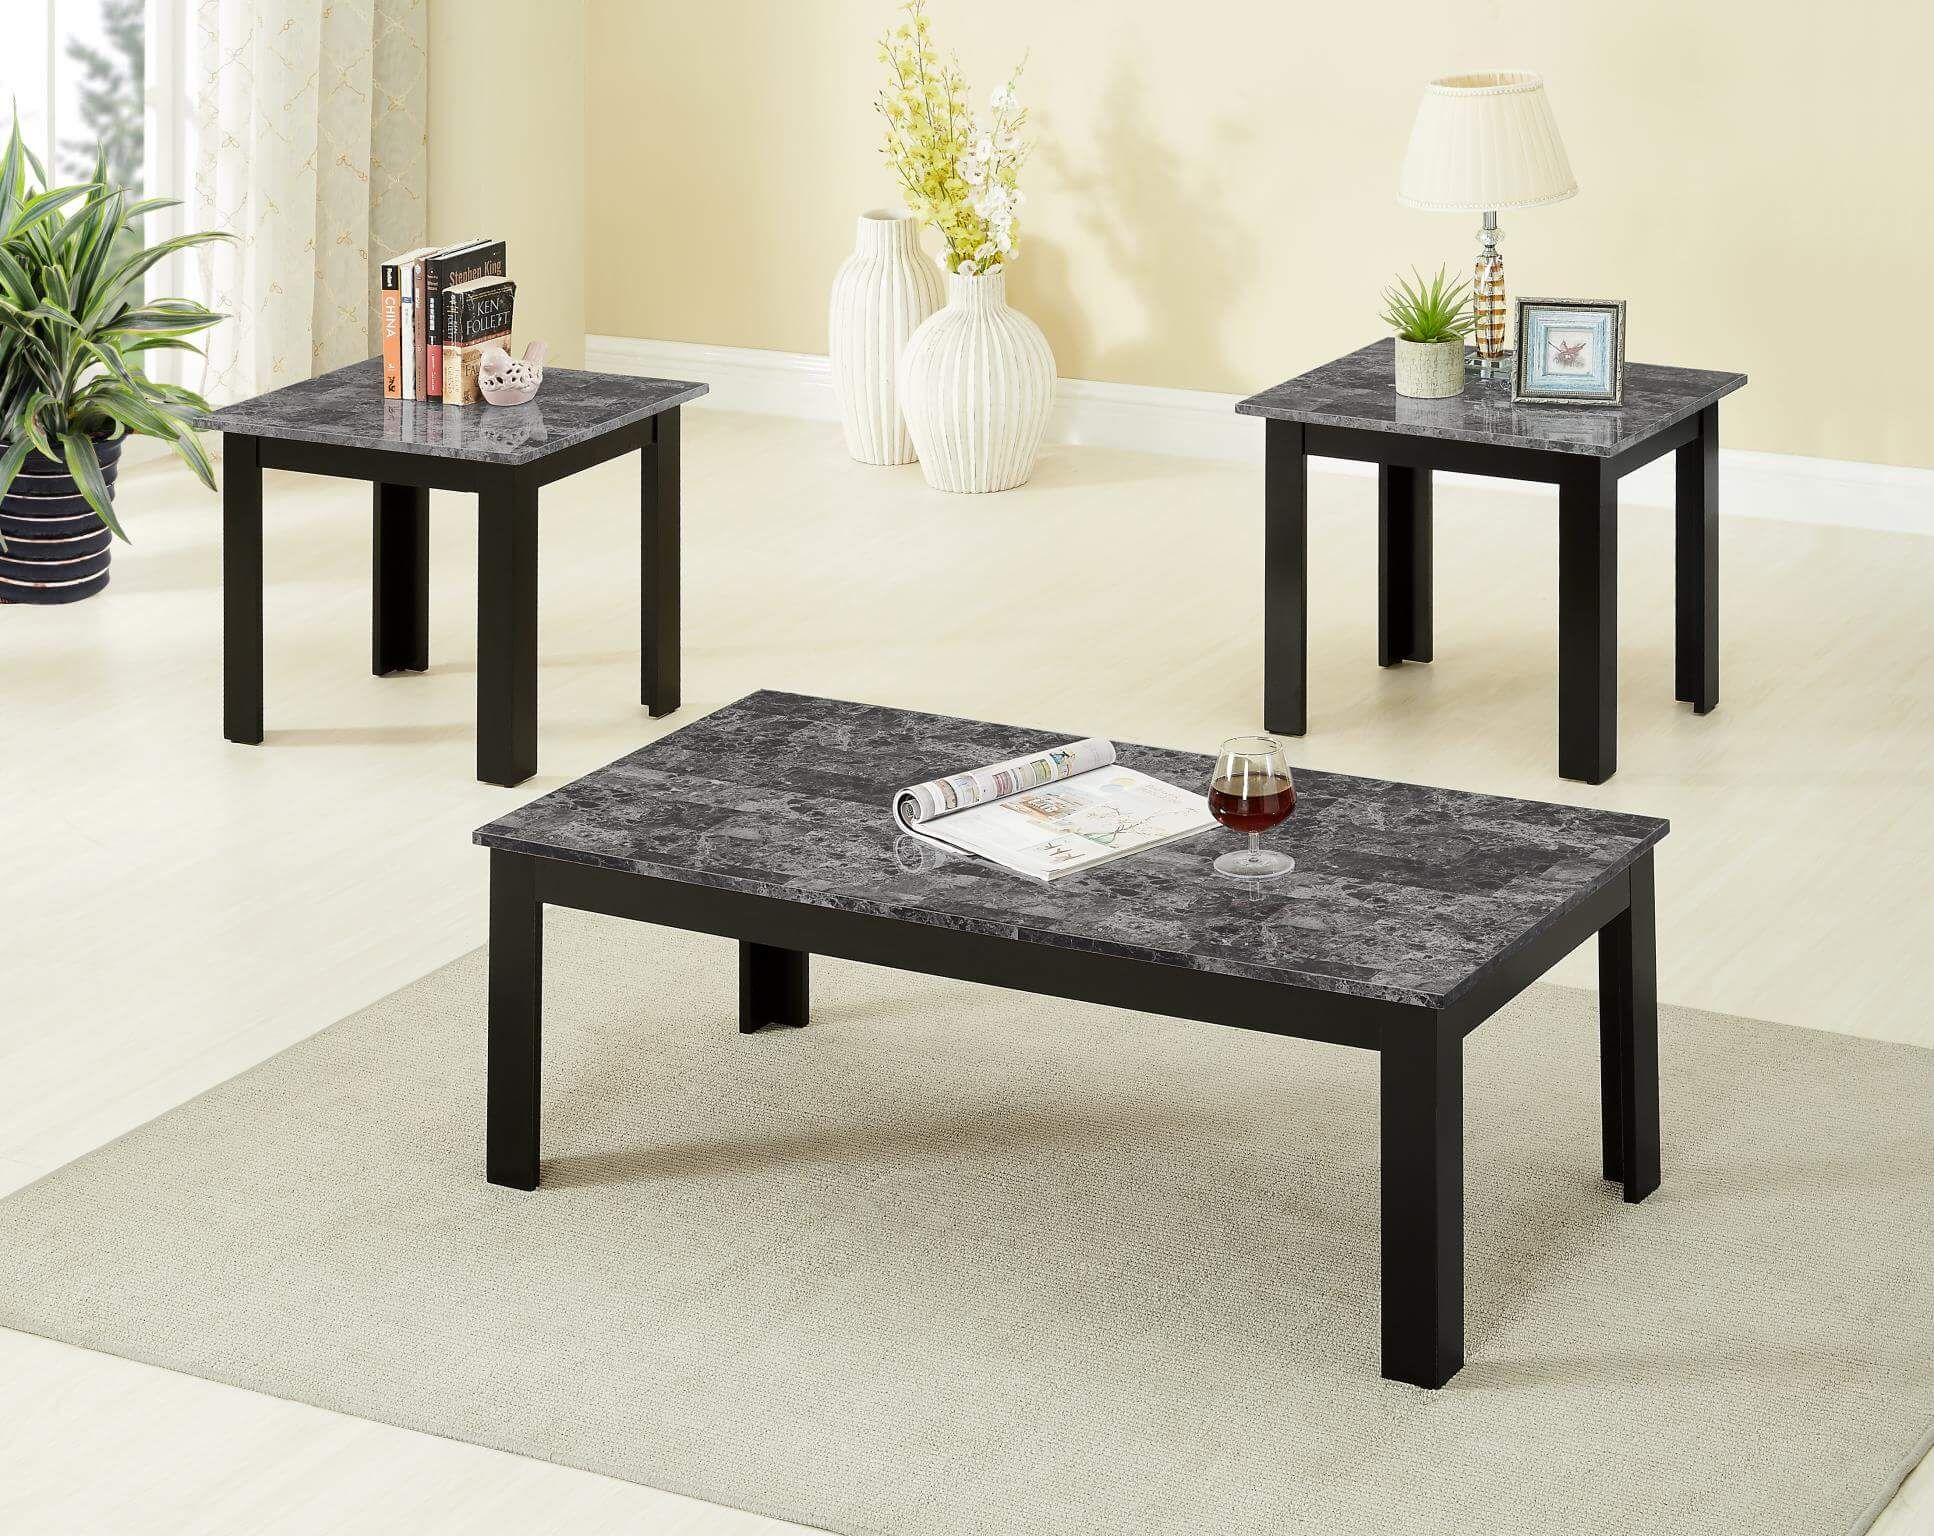 3 Piece Black Faux Marble Coffee And End Table Set Intended For Marble Coffee Tables Set Of  (View 12 of 15)